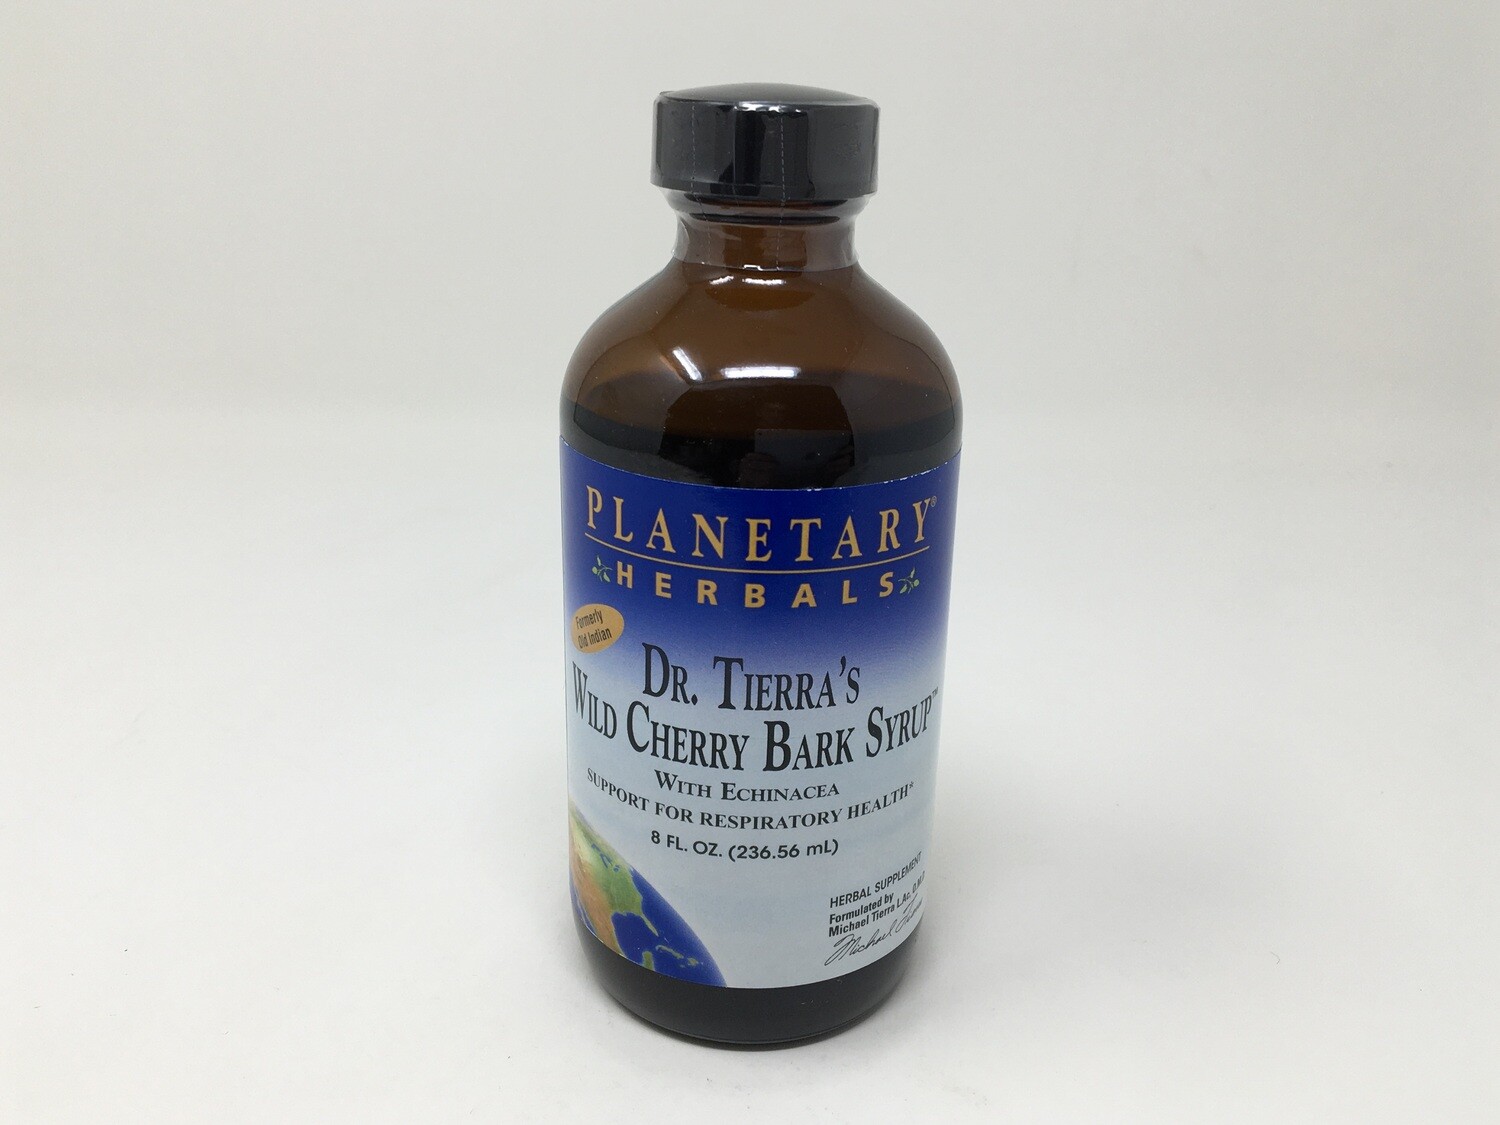 Dr Tierras Wild Cherry Bark Syrup 8oz(Planetary Herbals)